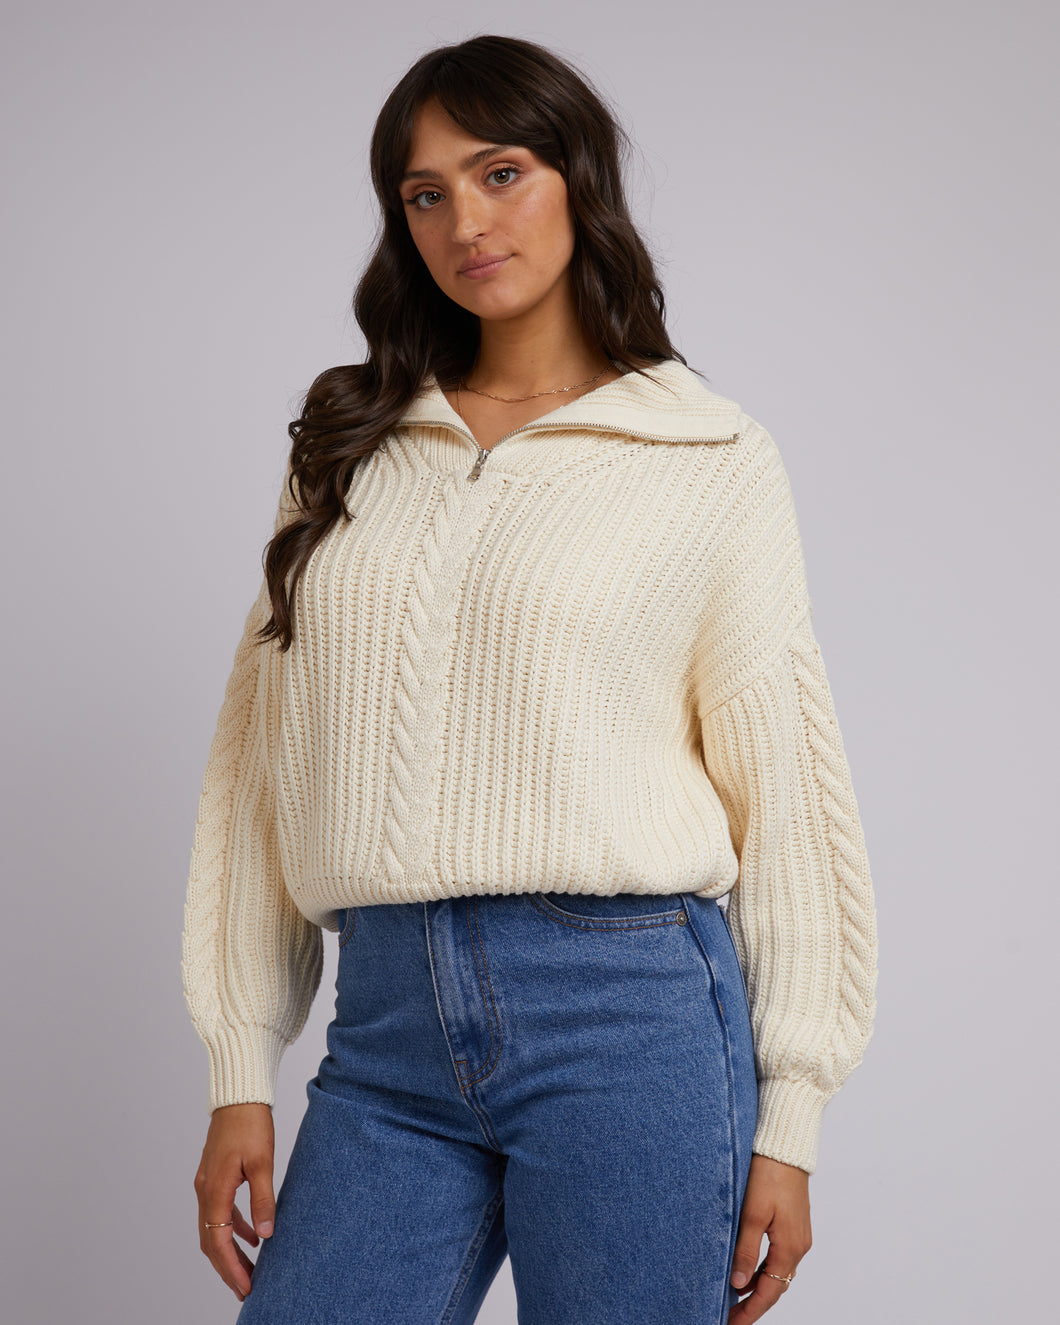 Dahlia 1/4 Zip Knit / Vintage White // All About Eve